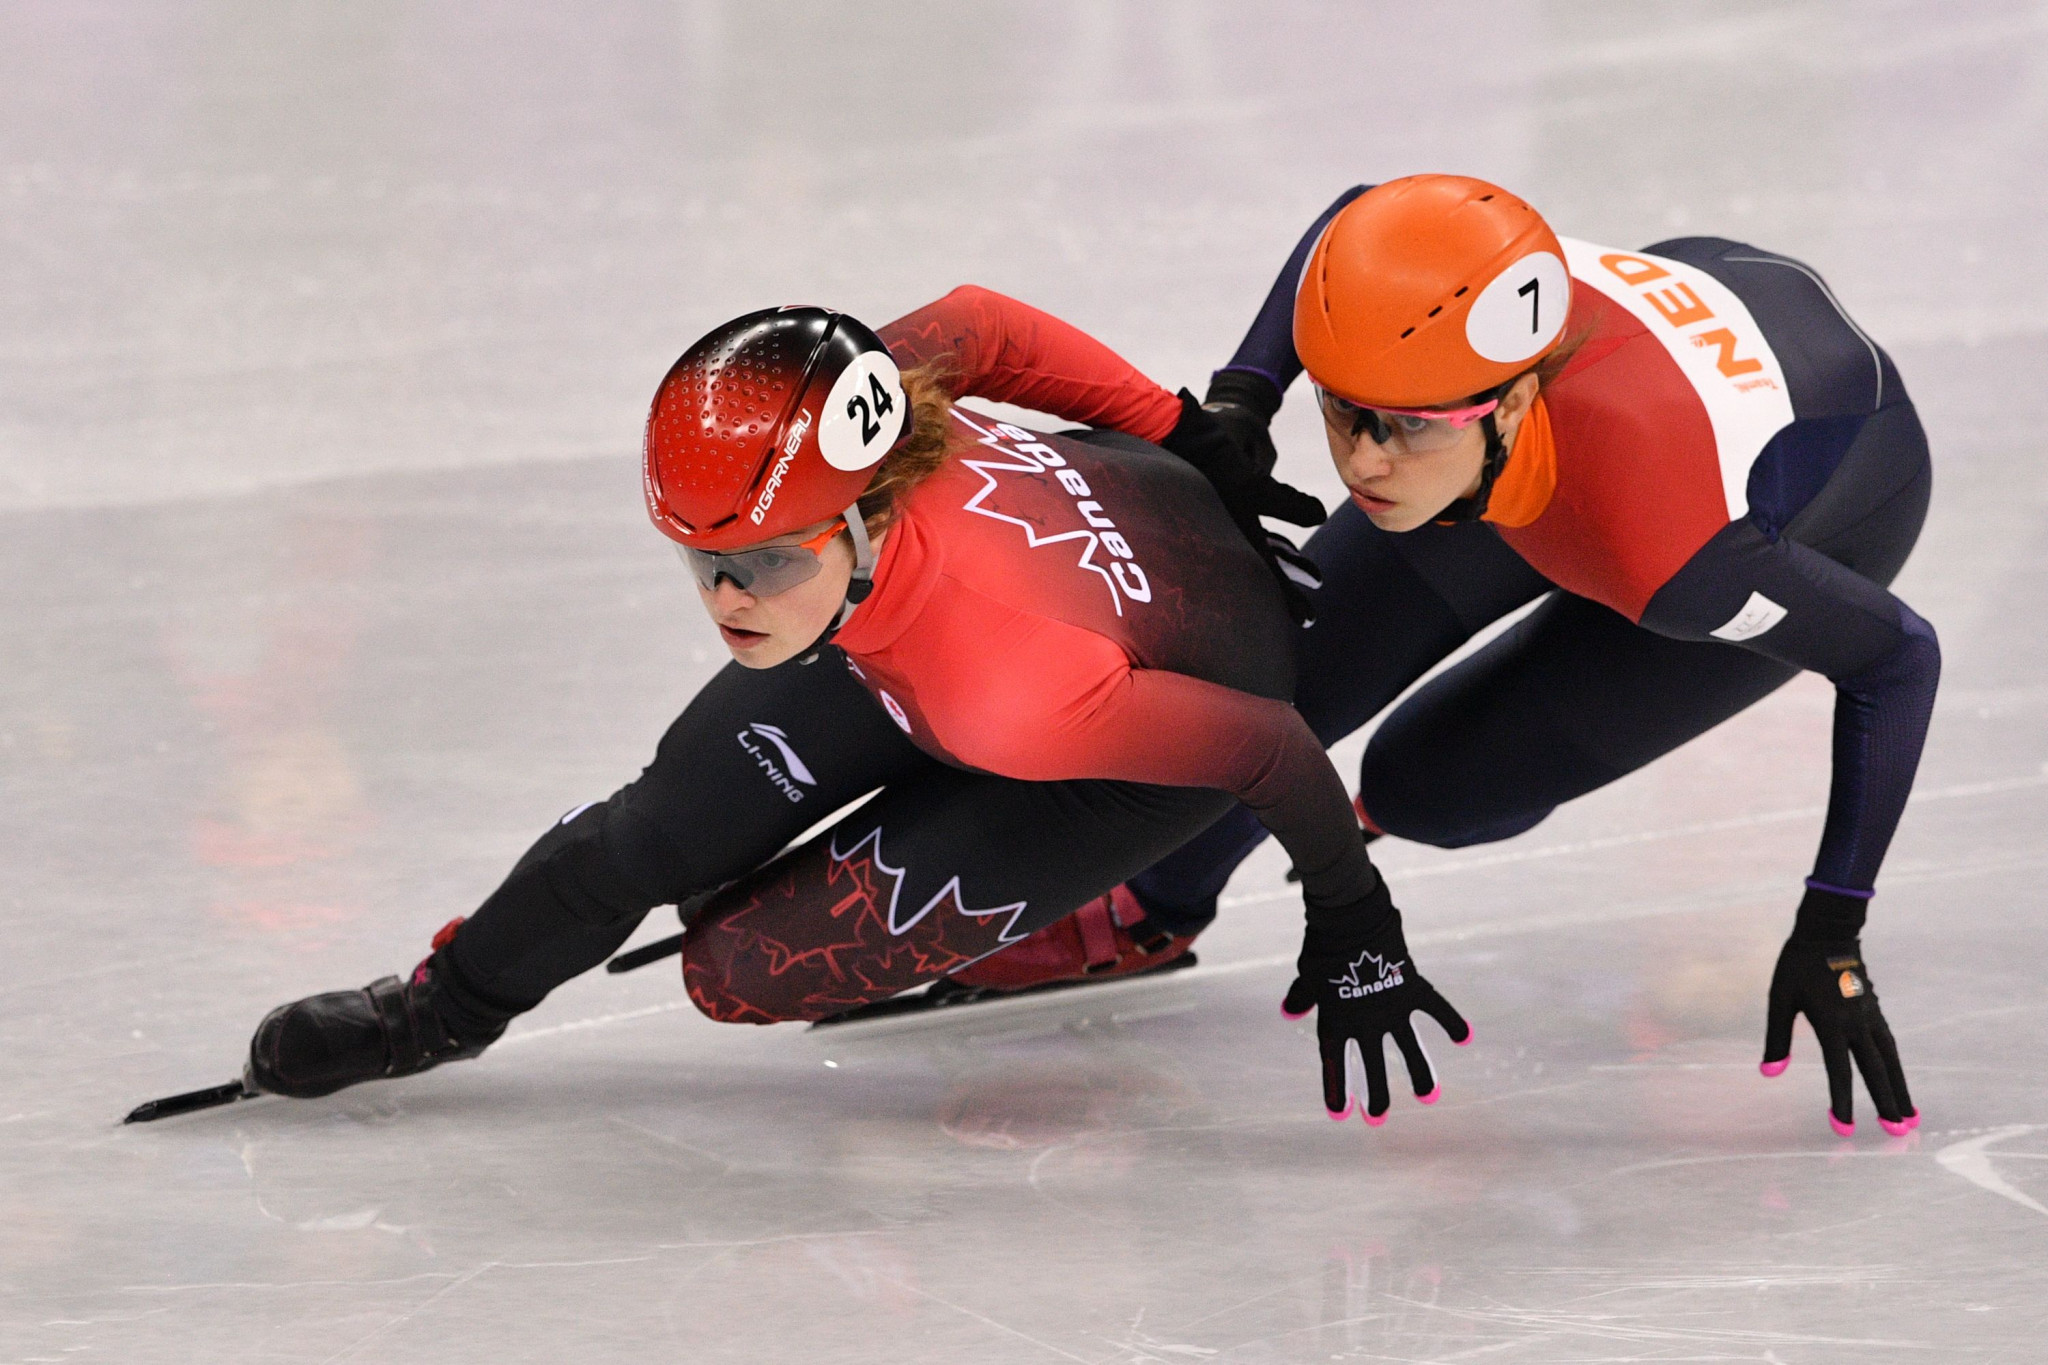 Boutin and Girard start well on home ice at World Short Track Speed Skating Championships